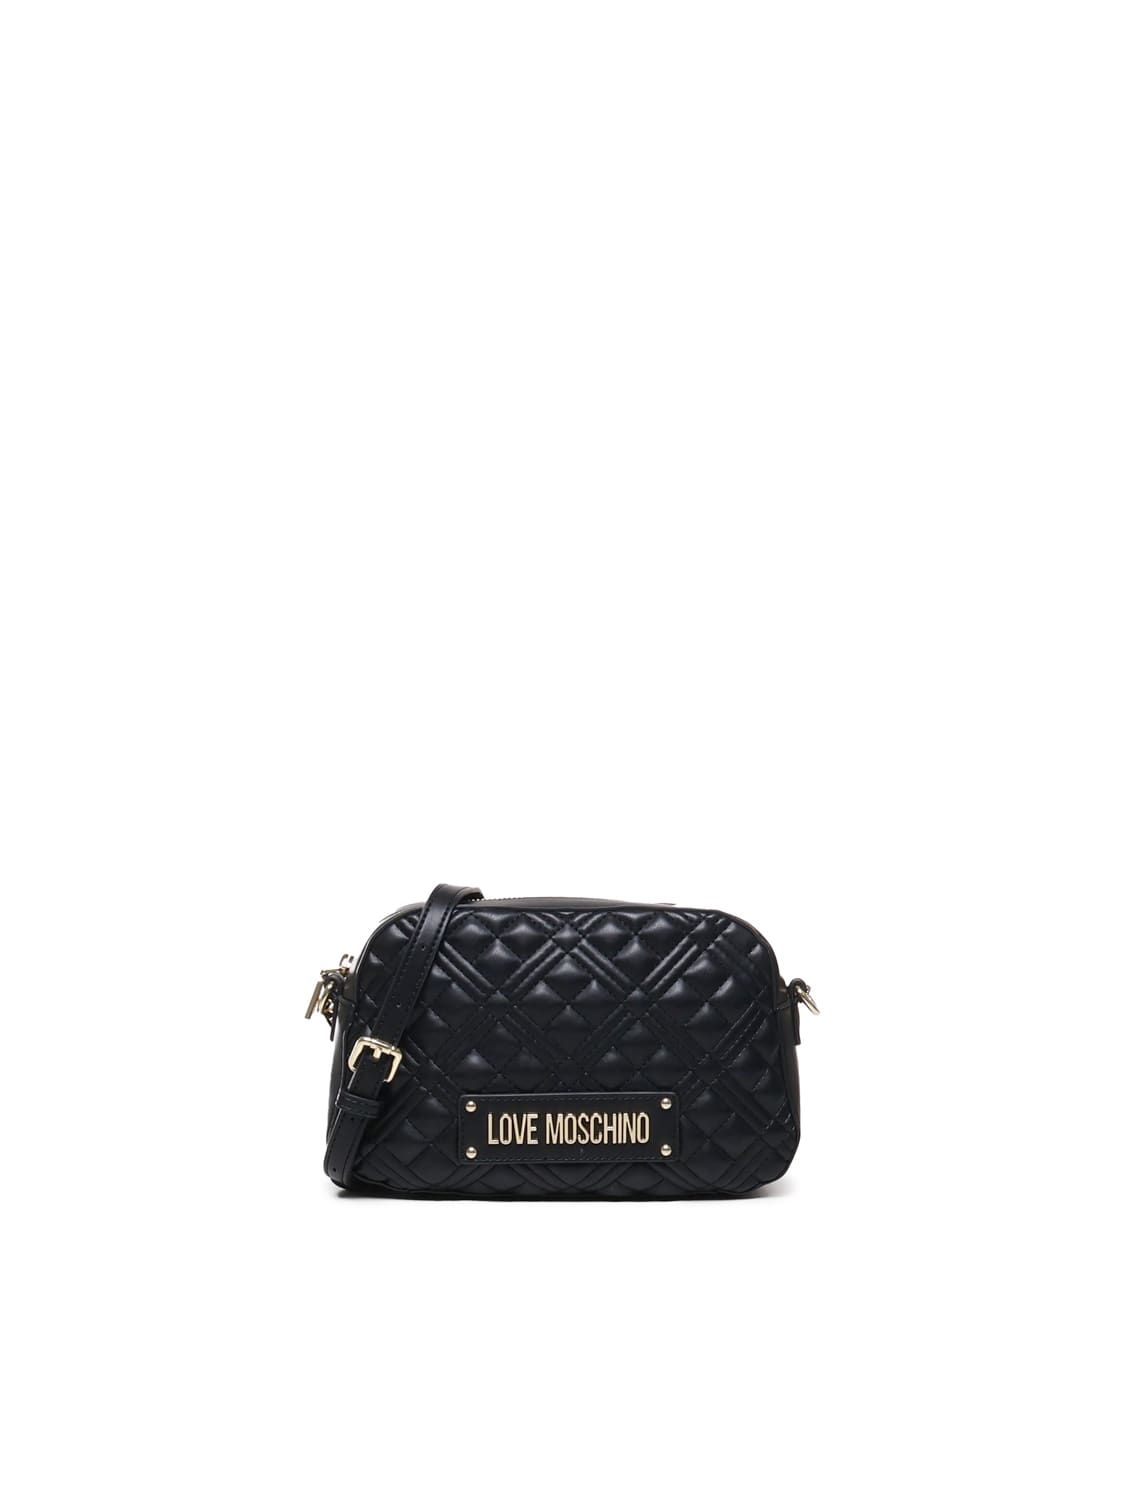 Love Moschino Quilted Bag With Logo In Black